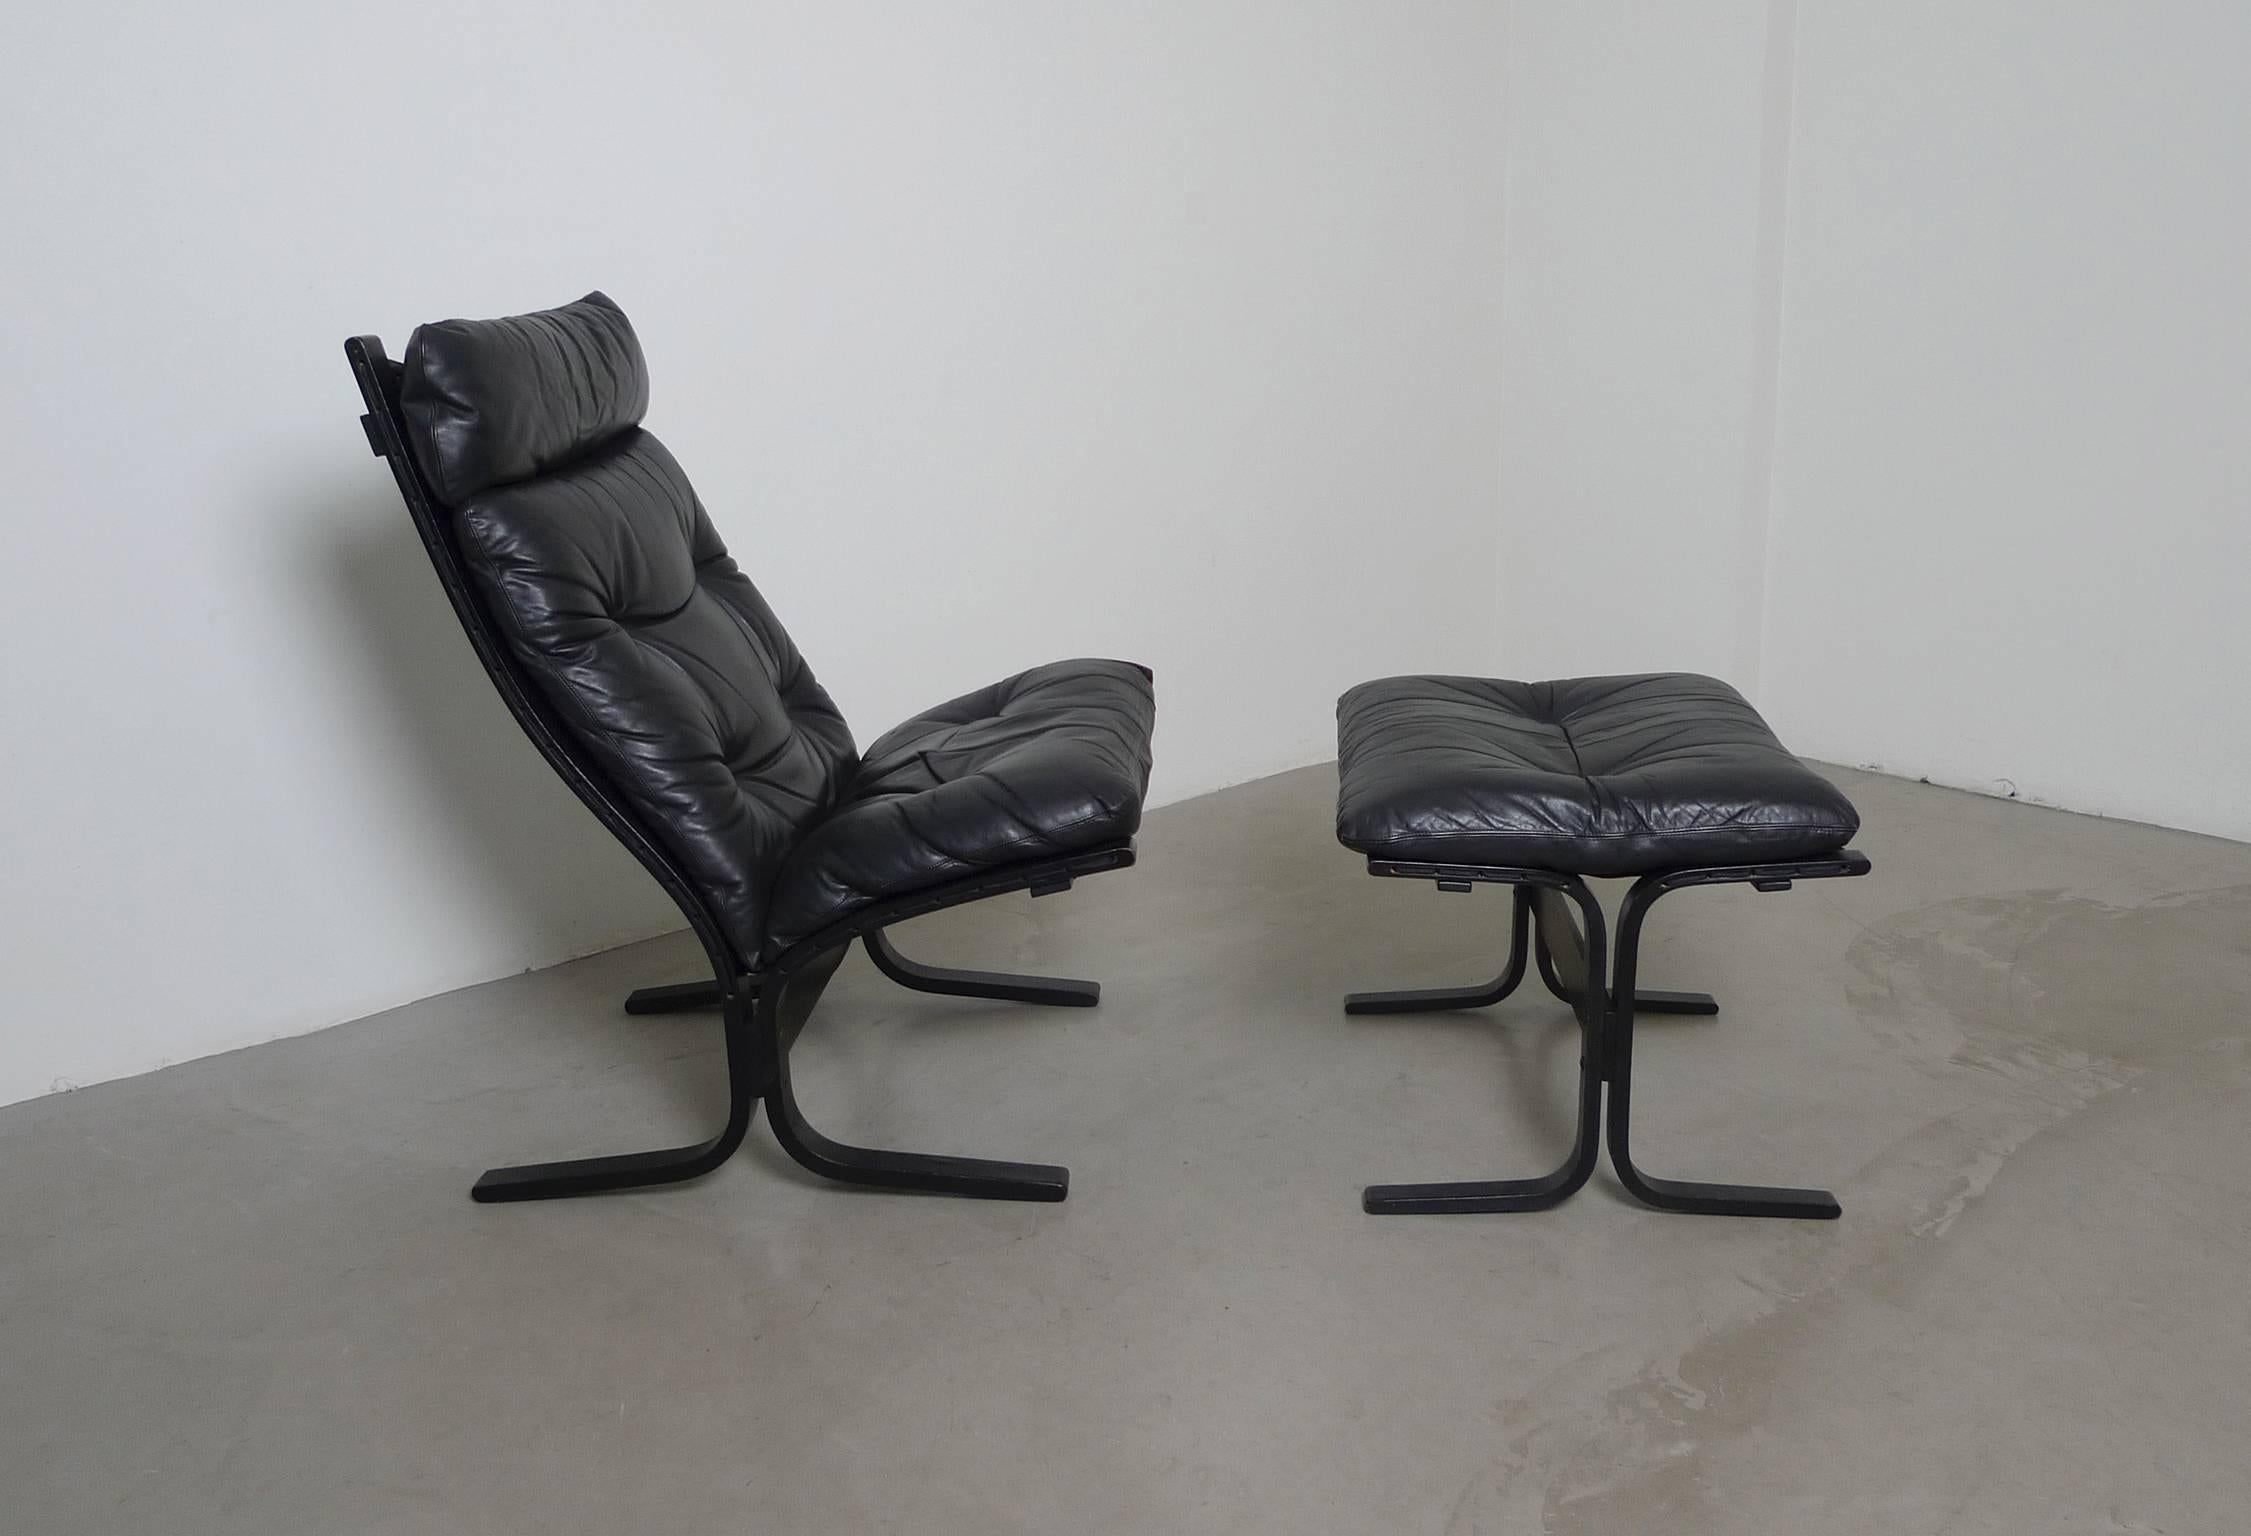 The Siesta lounge chair was designed by Ingmar Relling in the 1960s for the Norwegian manufacturer Westnofa. High back chair and ottoman have black leather covers and both frames are made of black bated laminated wood. The condition is very good.